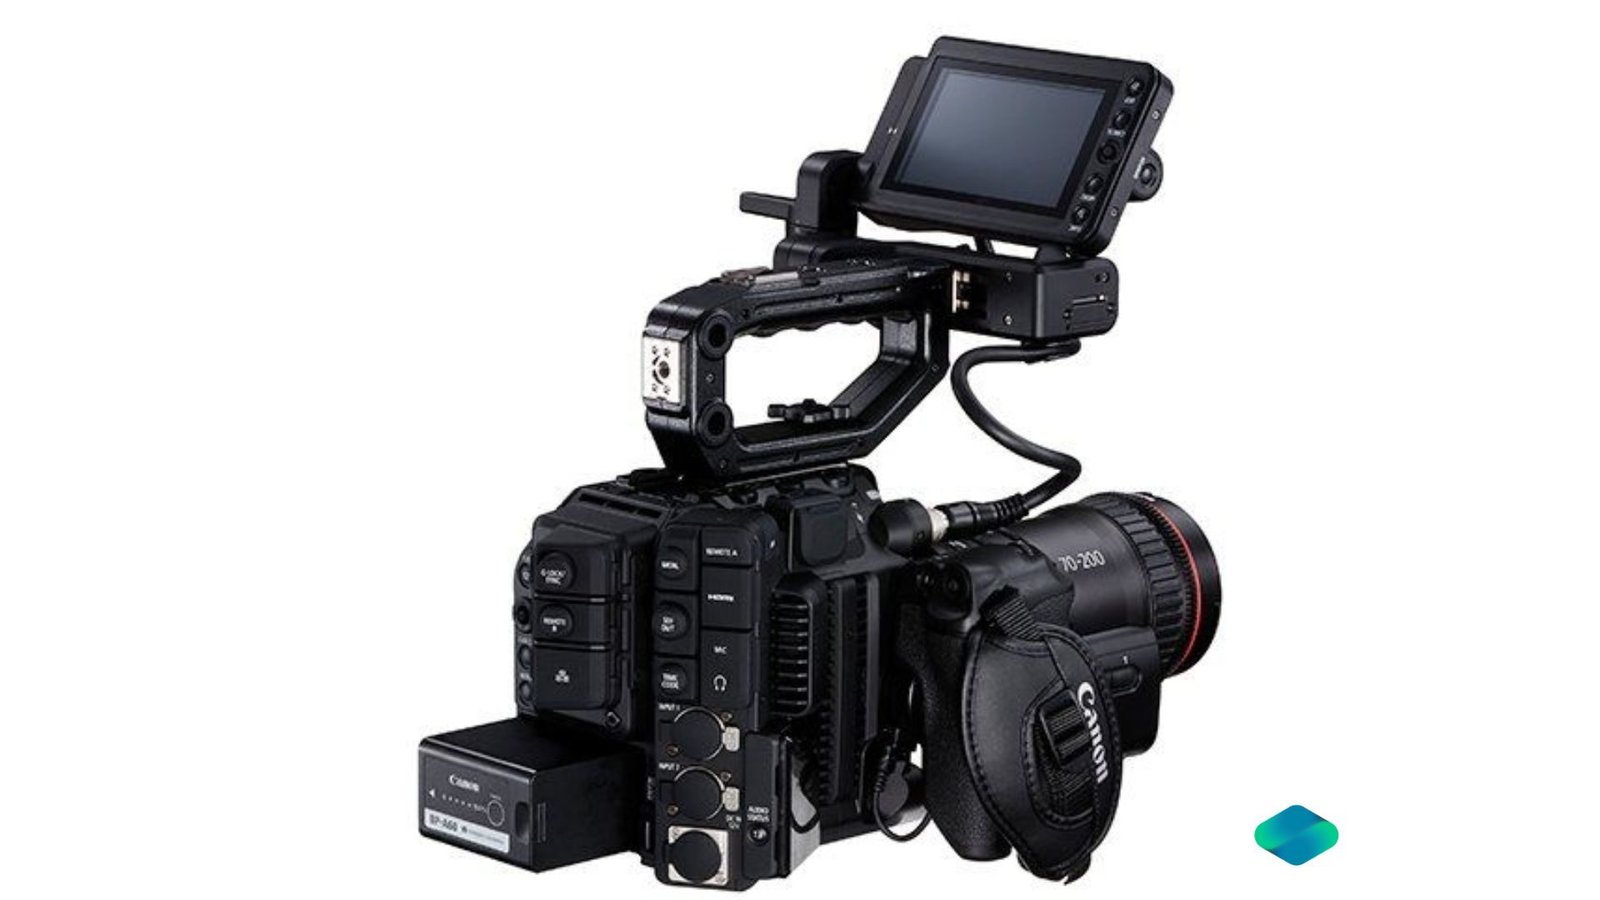 Rent Canon C-300 Mark III Camera with Cp.3 Lens Kit in Delhi NCR, Rent Canon EOS R-5 Mirror Less 8K Camera with Cp.2 Lens Kit in Delhi NCR, Camera accessories, Camera lenses for rent, in Delhi Gurgaon Noida, hire Shooting equipment, Lighting equipment rental, Film gear rental for Video production, camera rental company in Delhi, film equipment rental company